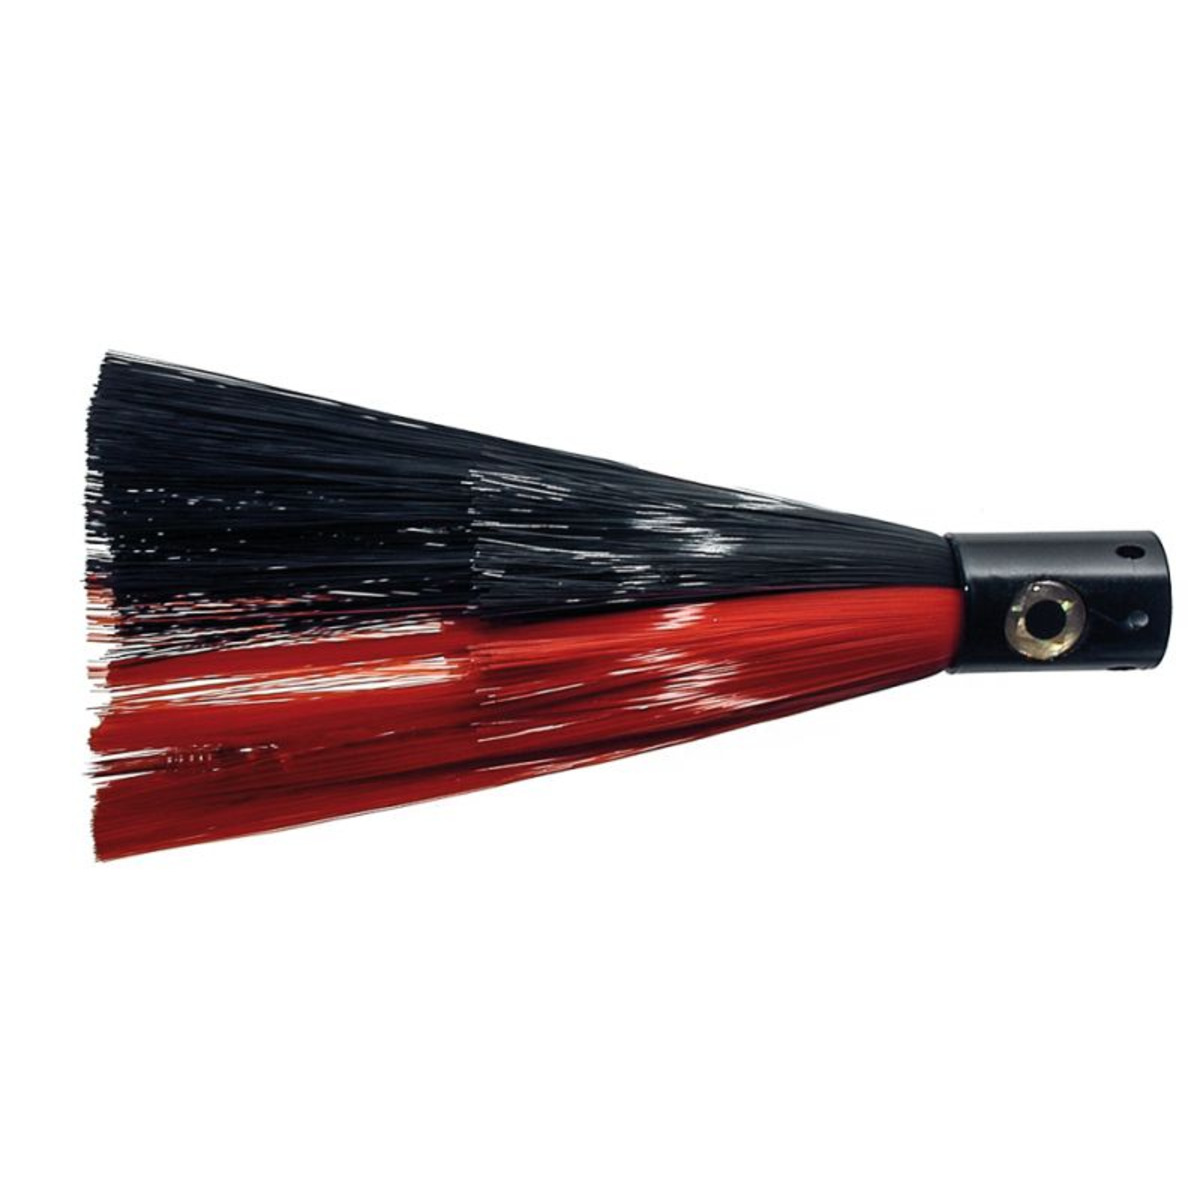 H2o Pro Express Lure - Red Black - 20 cm